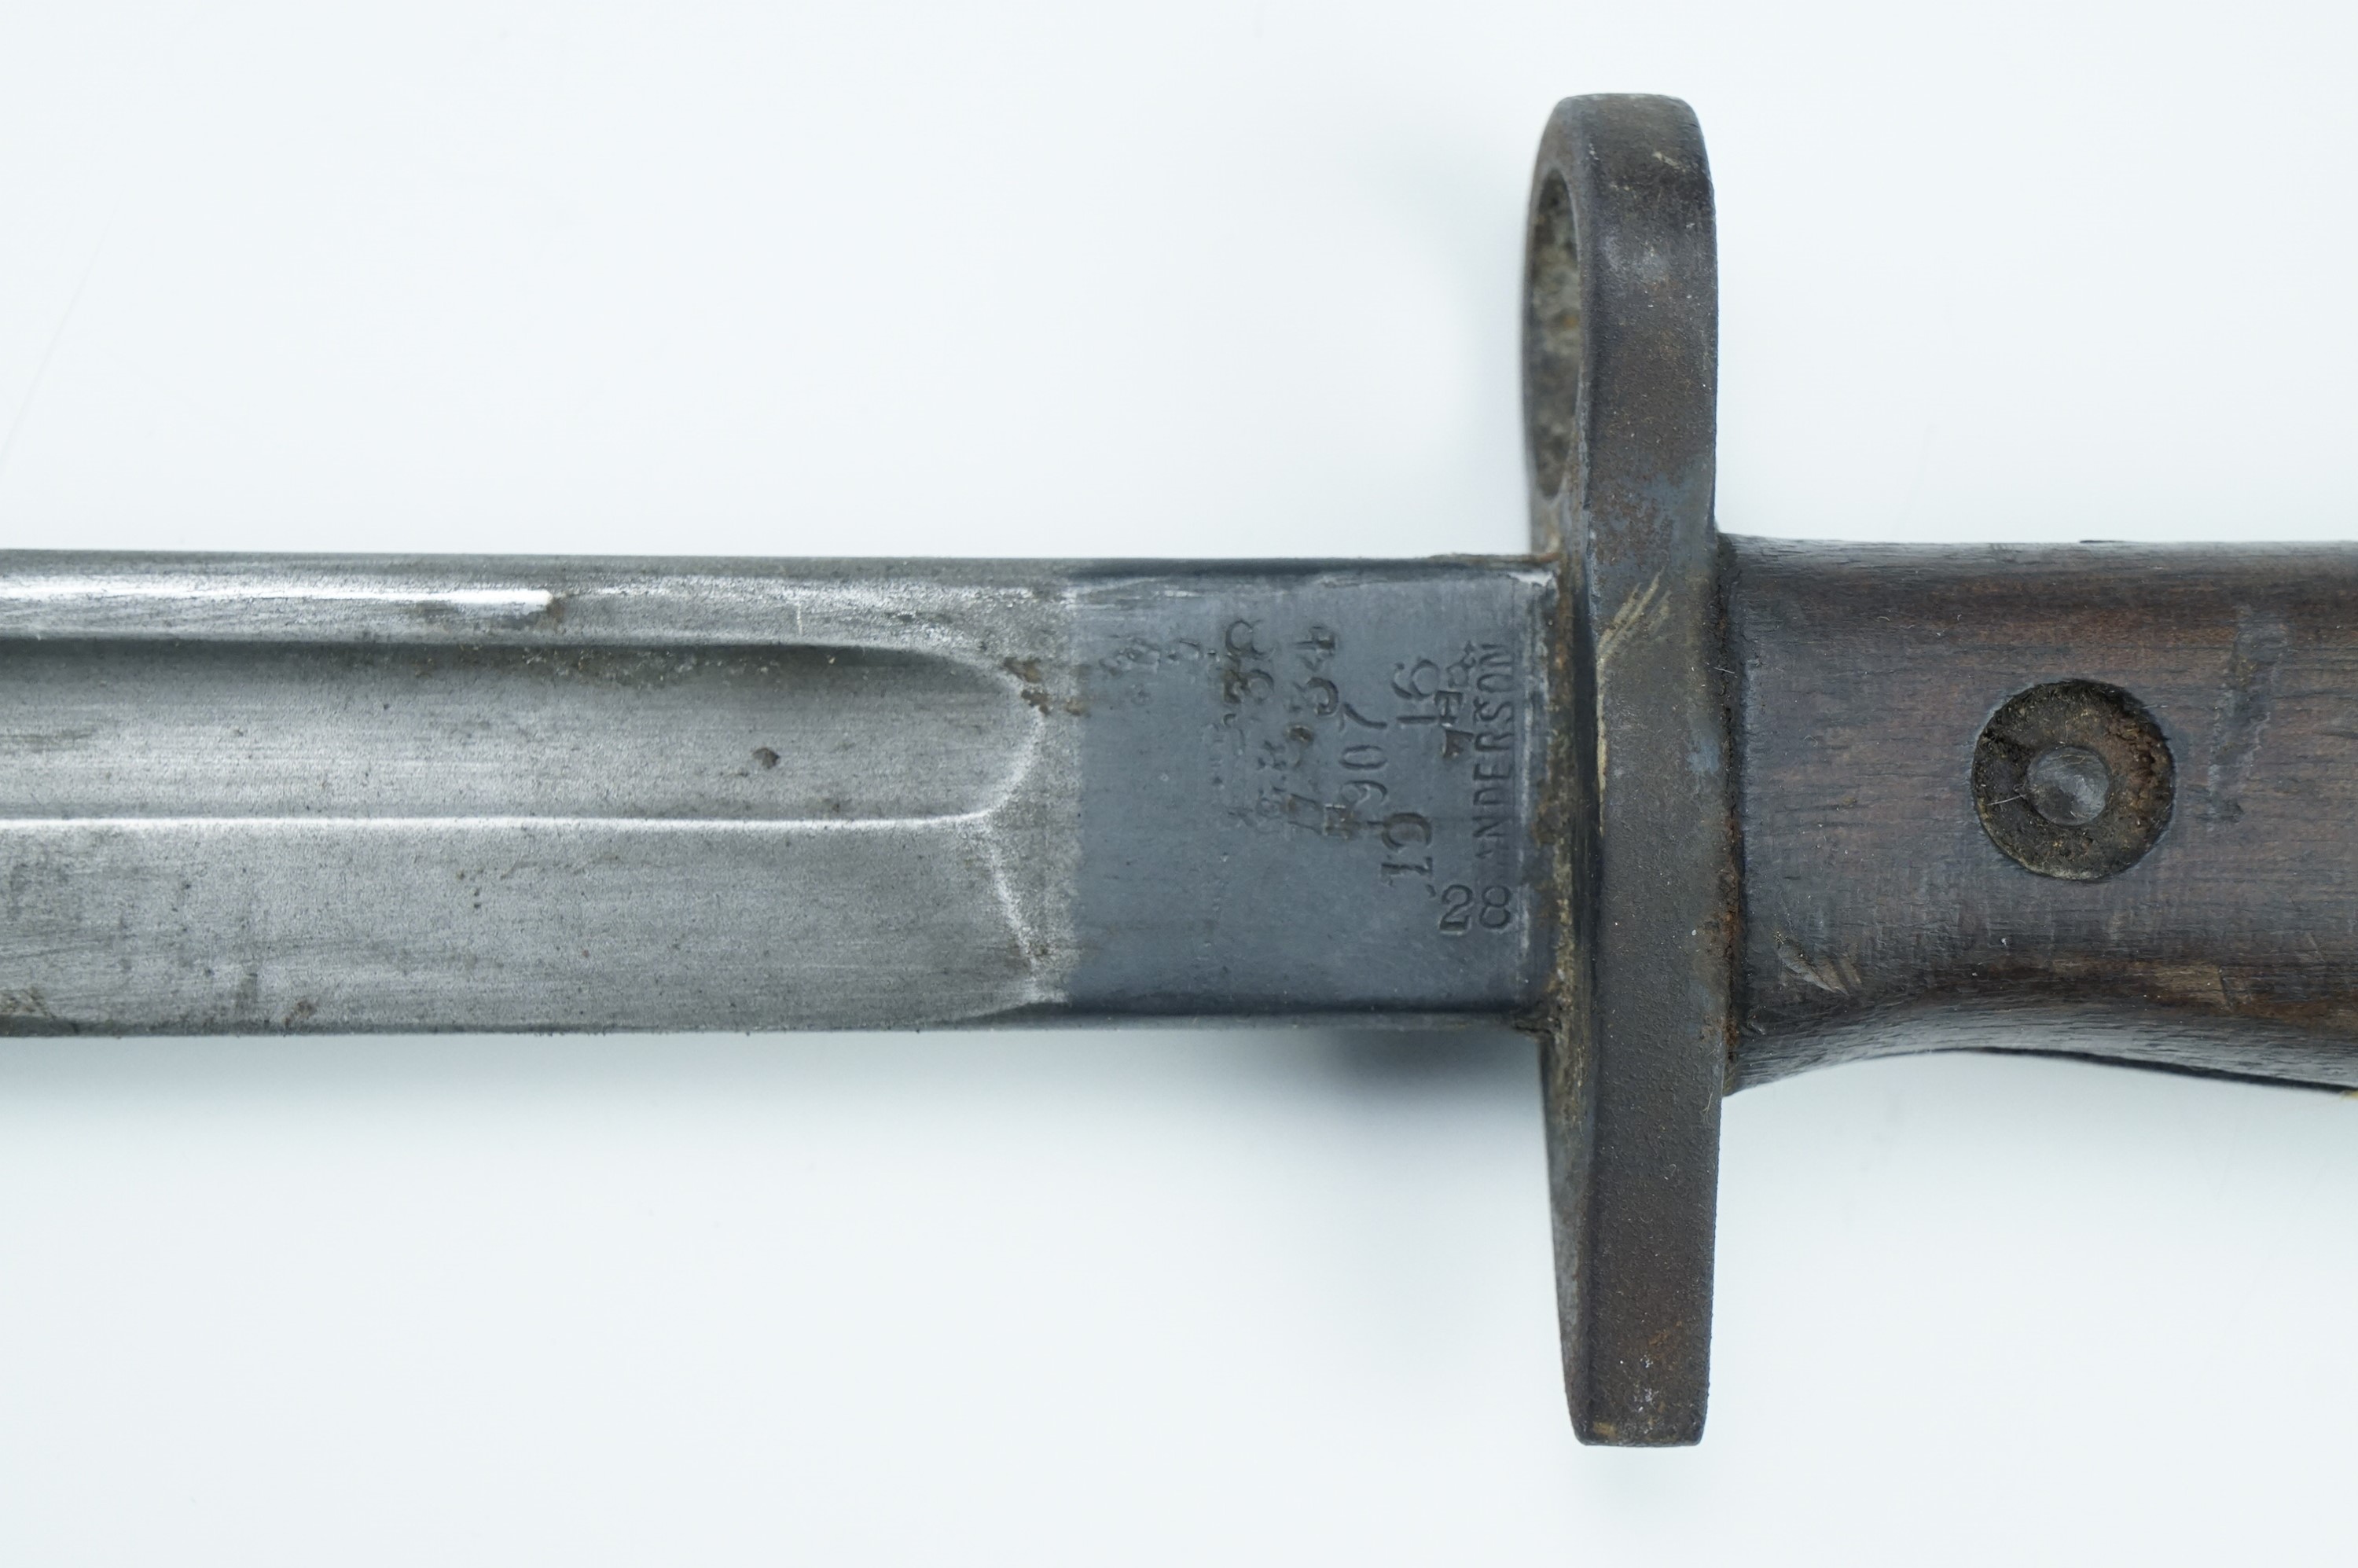 A Pattern 1907 bayonet by Sanderson, manufactured 1916, (scabbard lacking) - Image 4 of 4